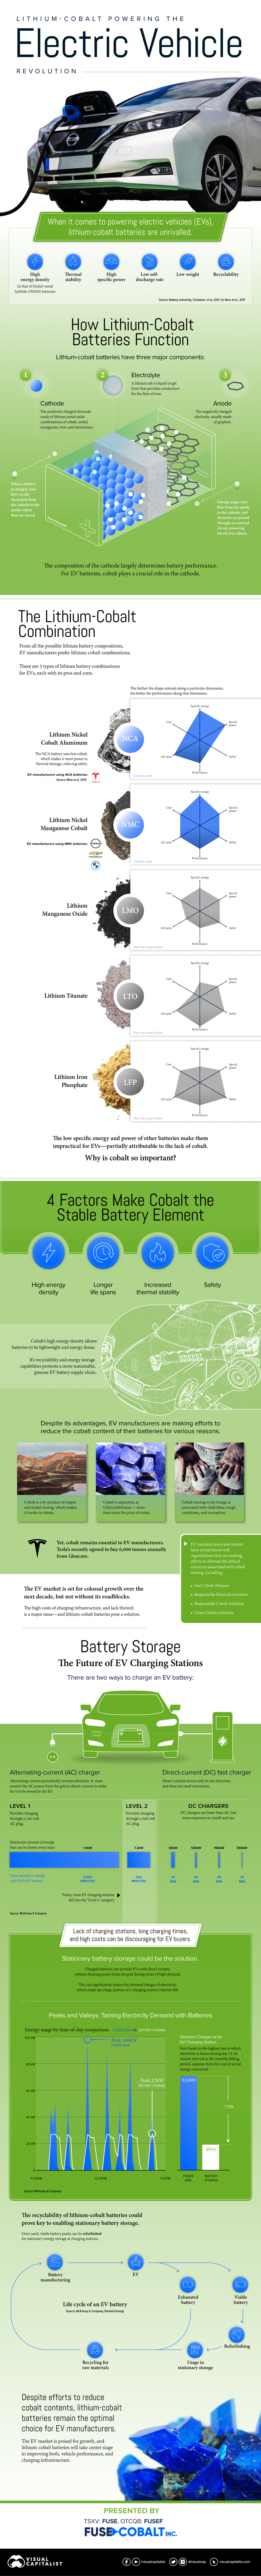 Lithium-cobalt batteries in electric vehicles